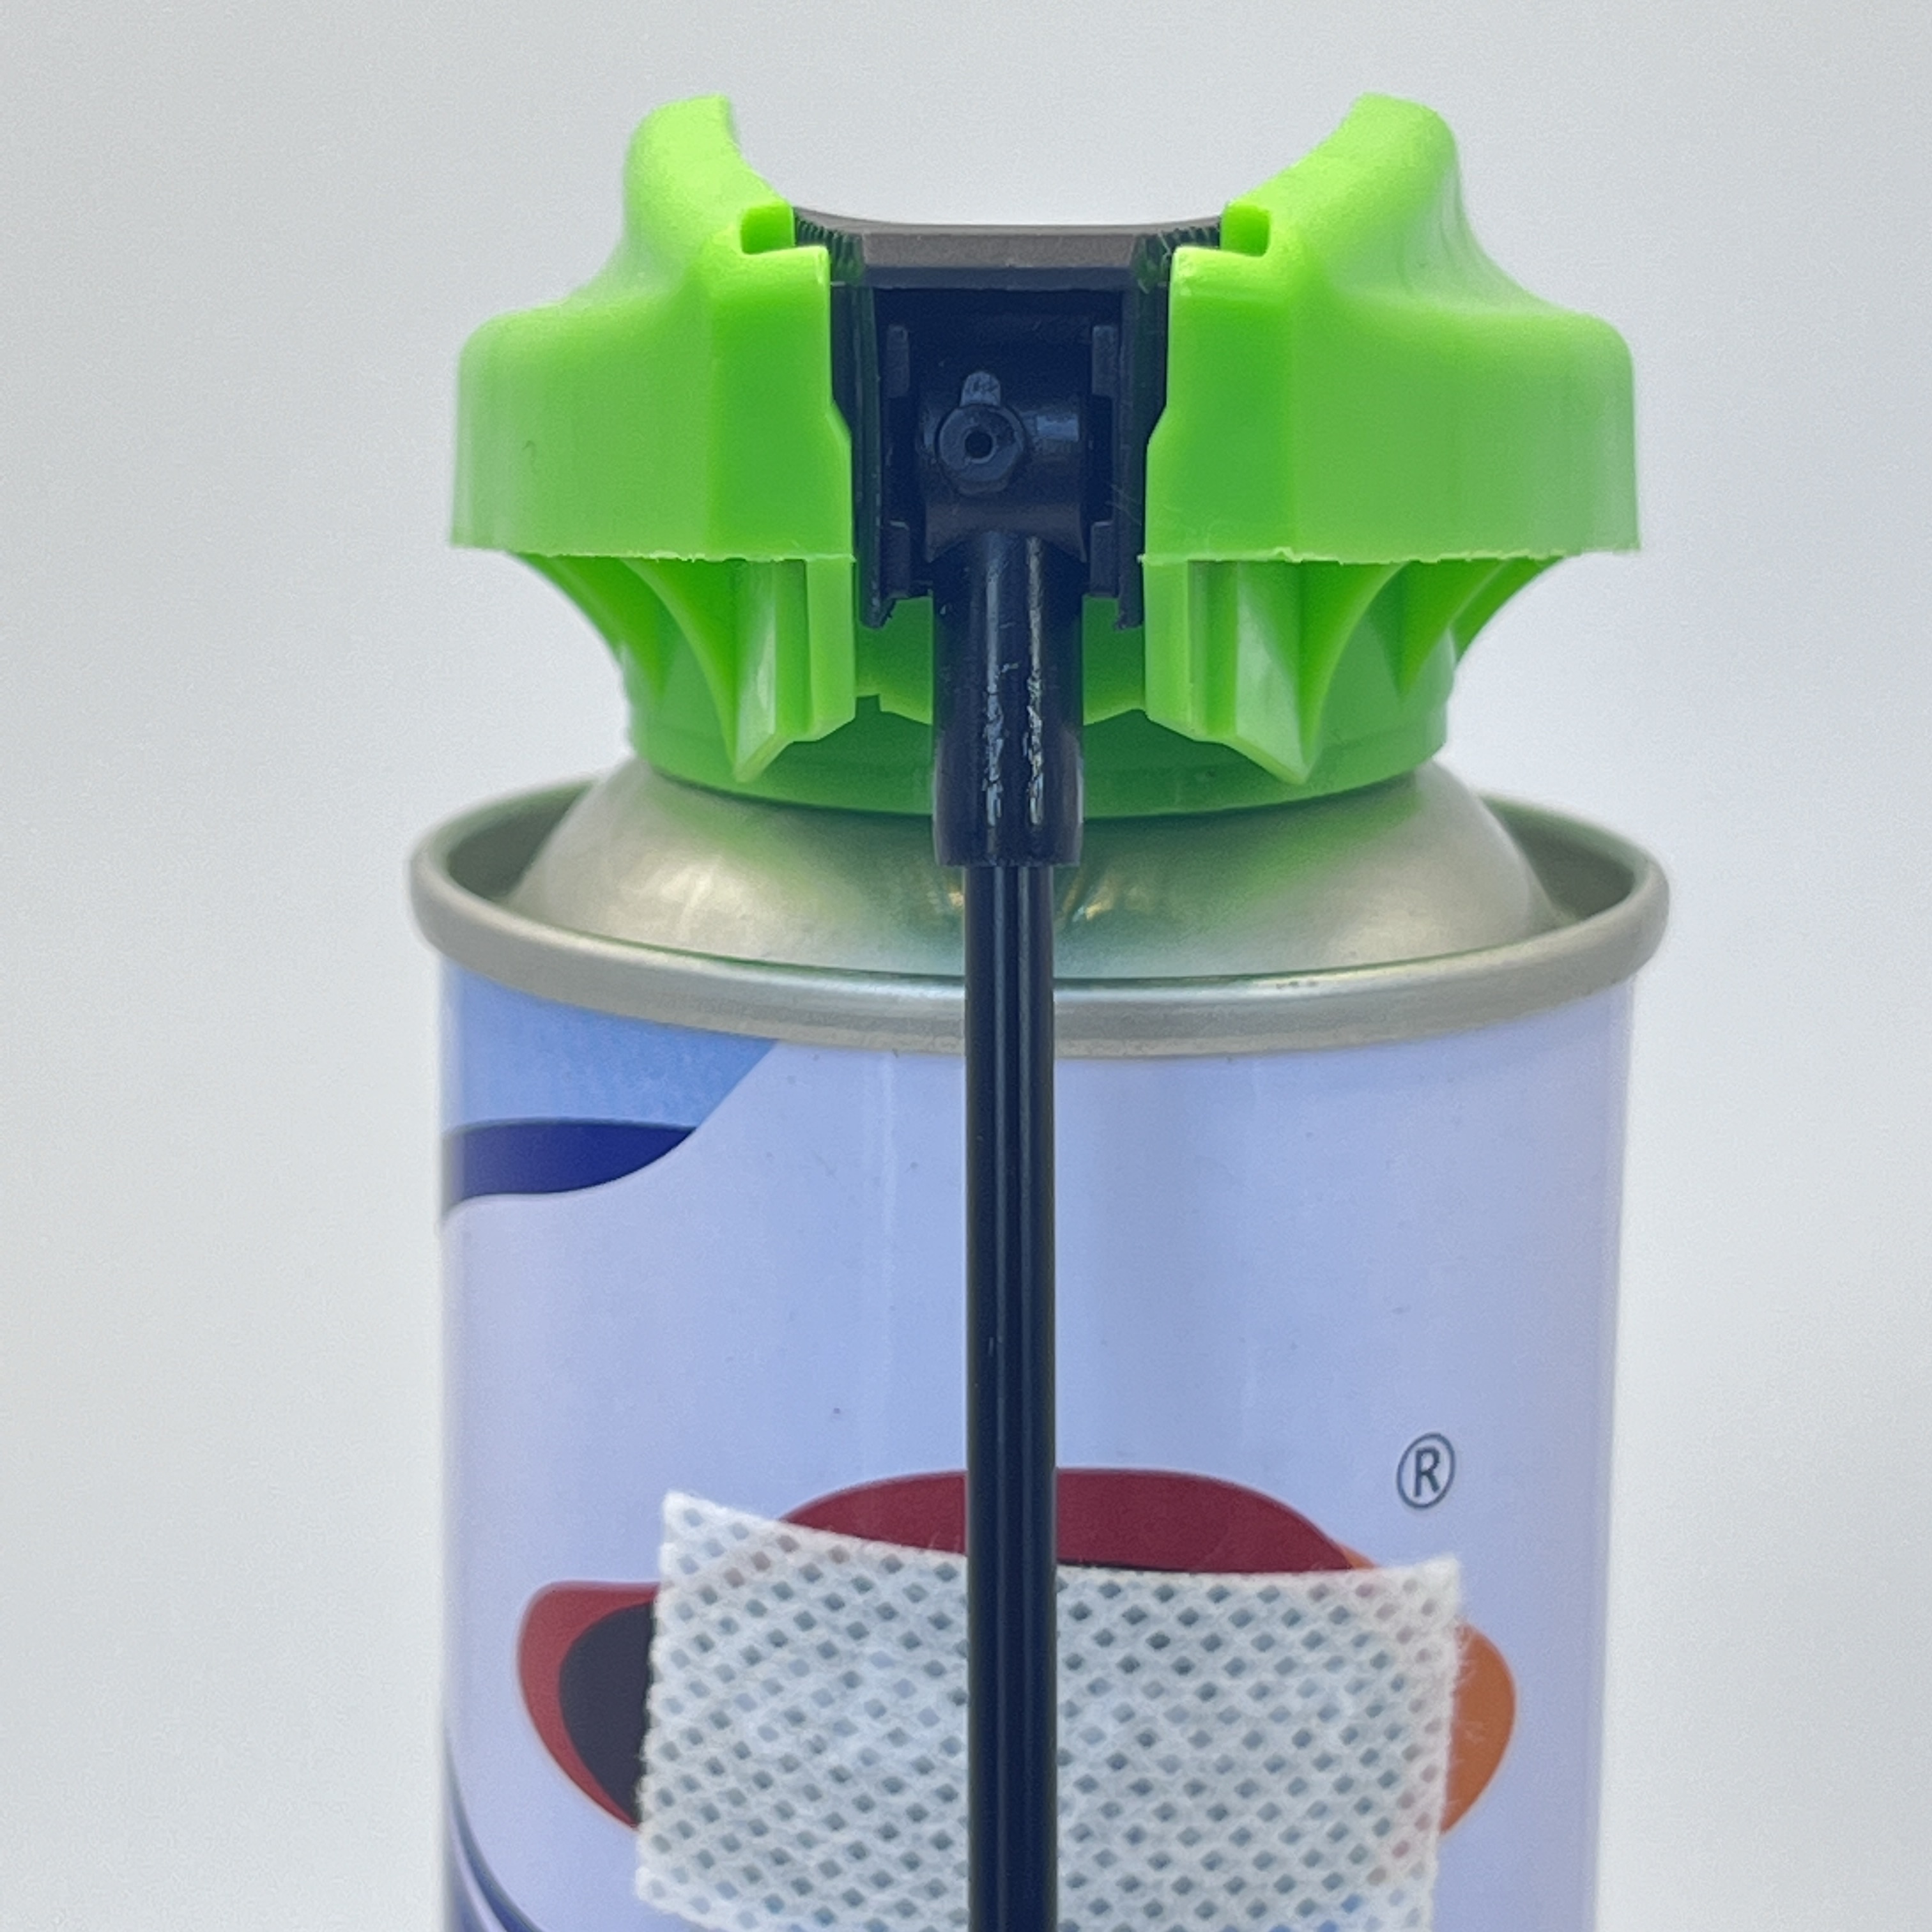 Versatile Aerosol Sprayer with Foldable Tube and Lock - Multi-Purpose Cleaning and Maintenance Solution